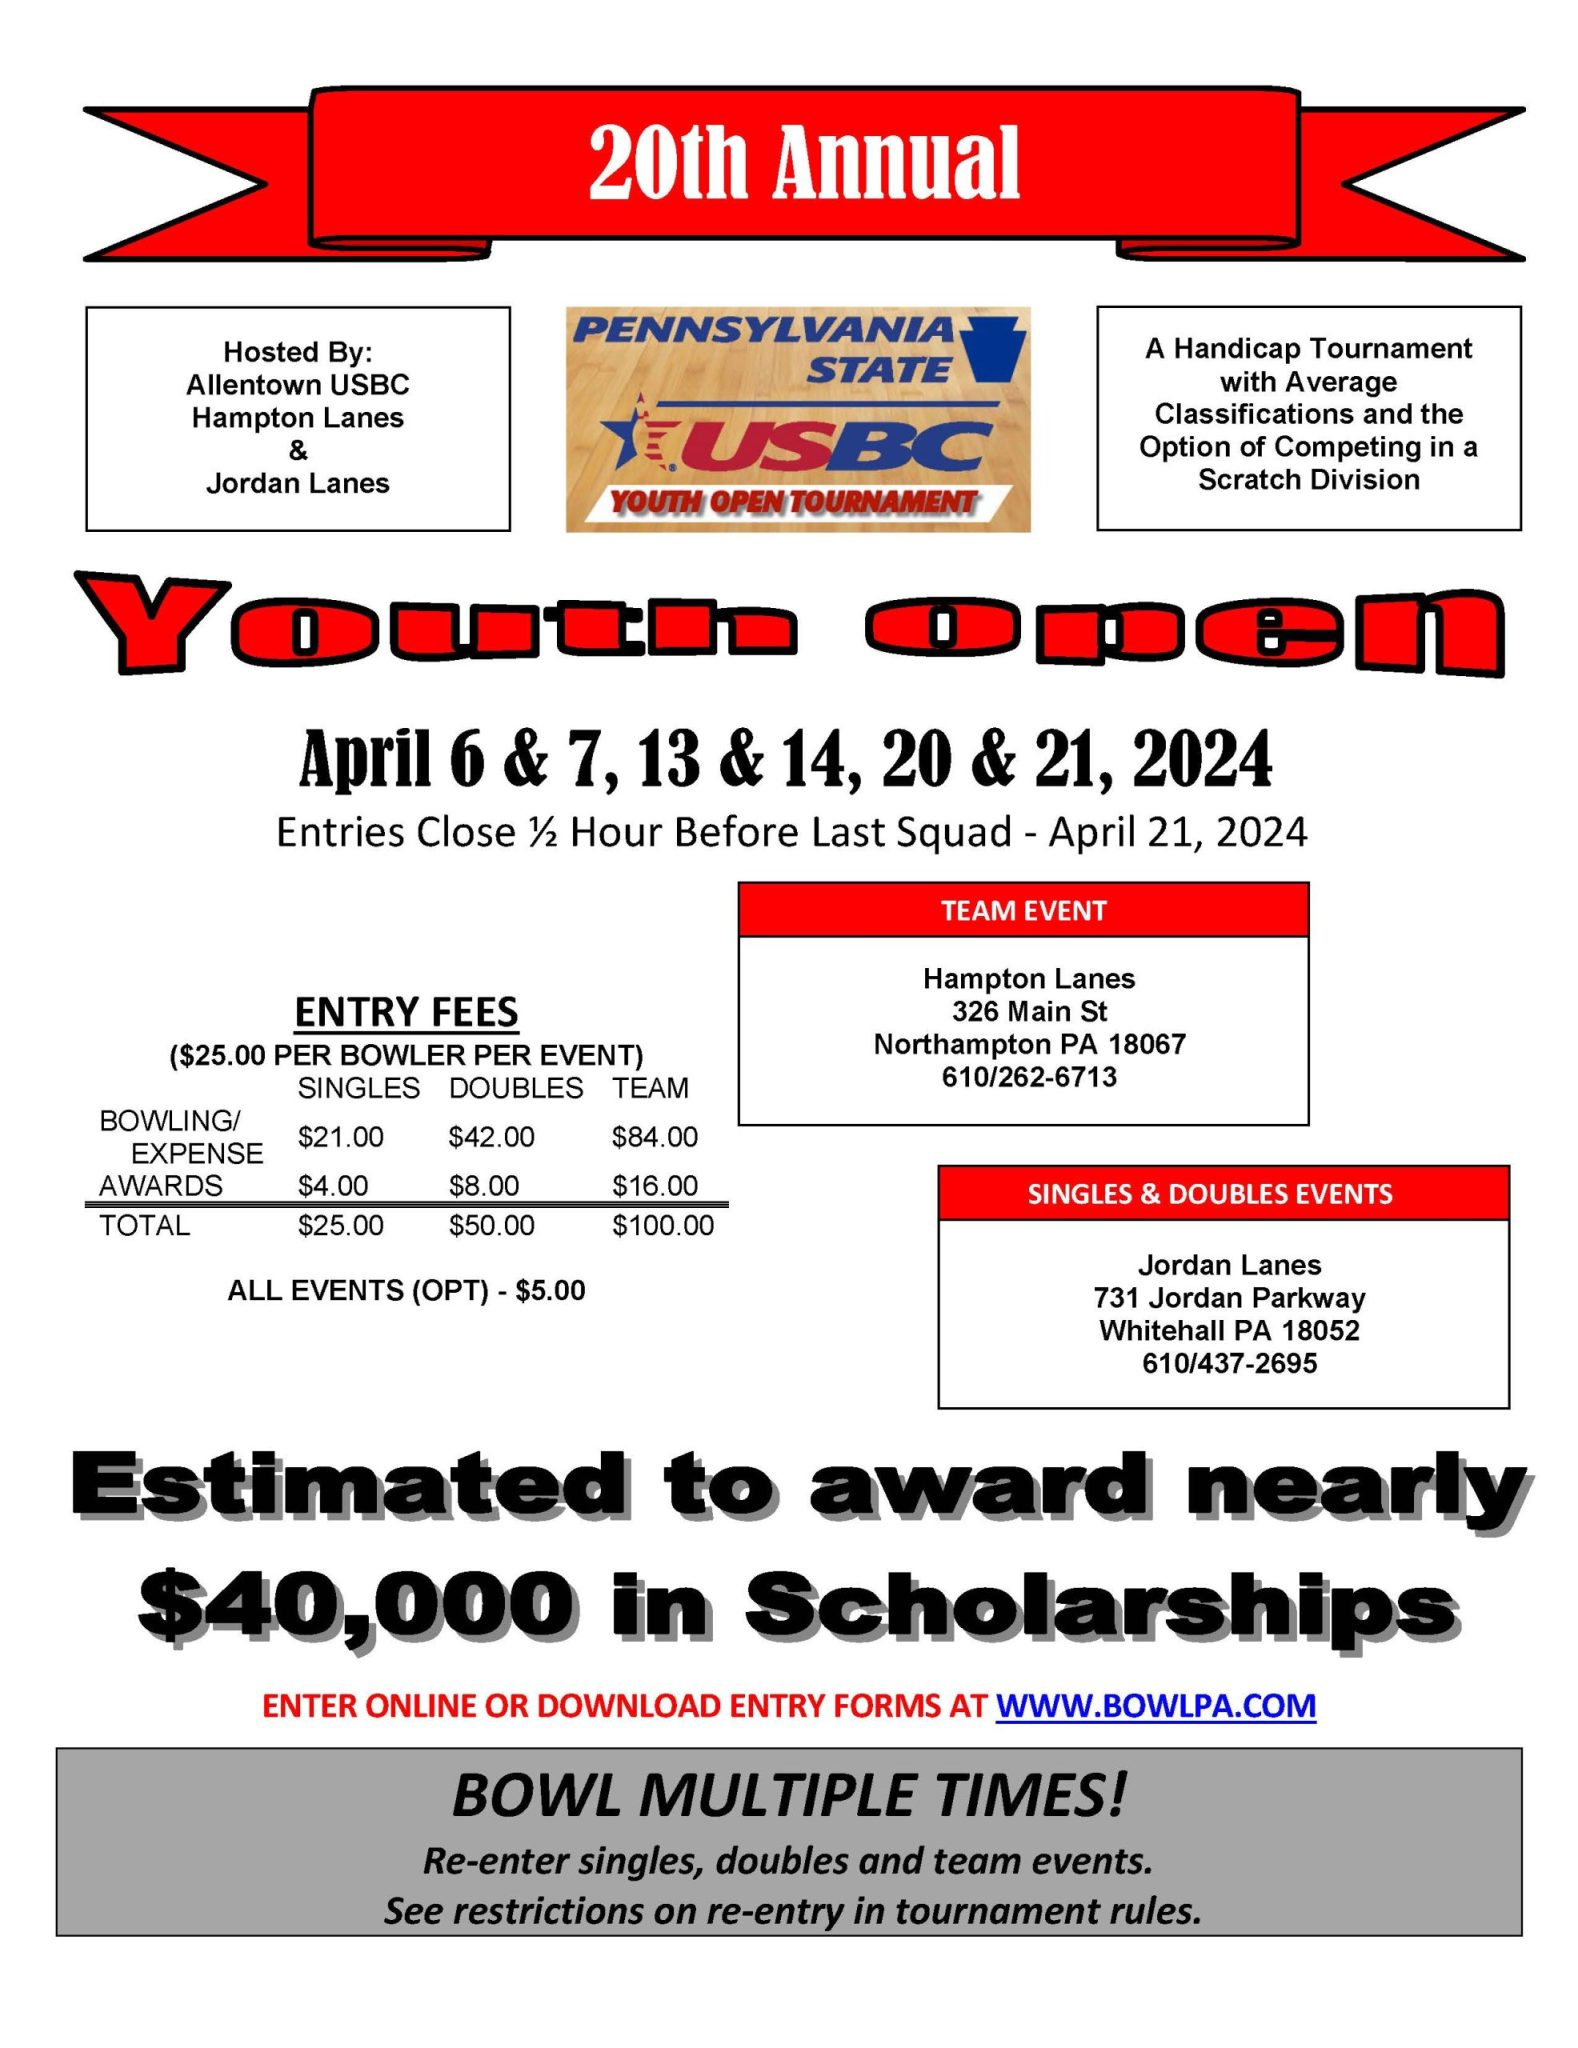 20th Annual Pennsylvania State Youth Open 5